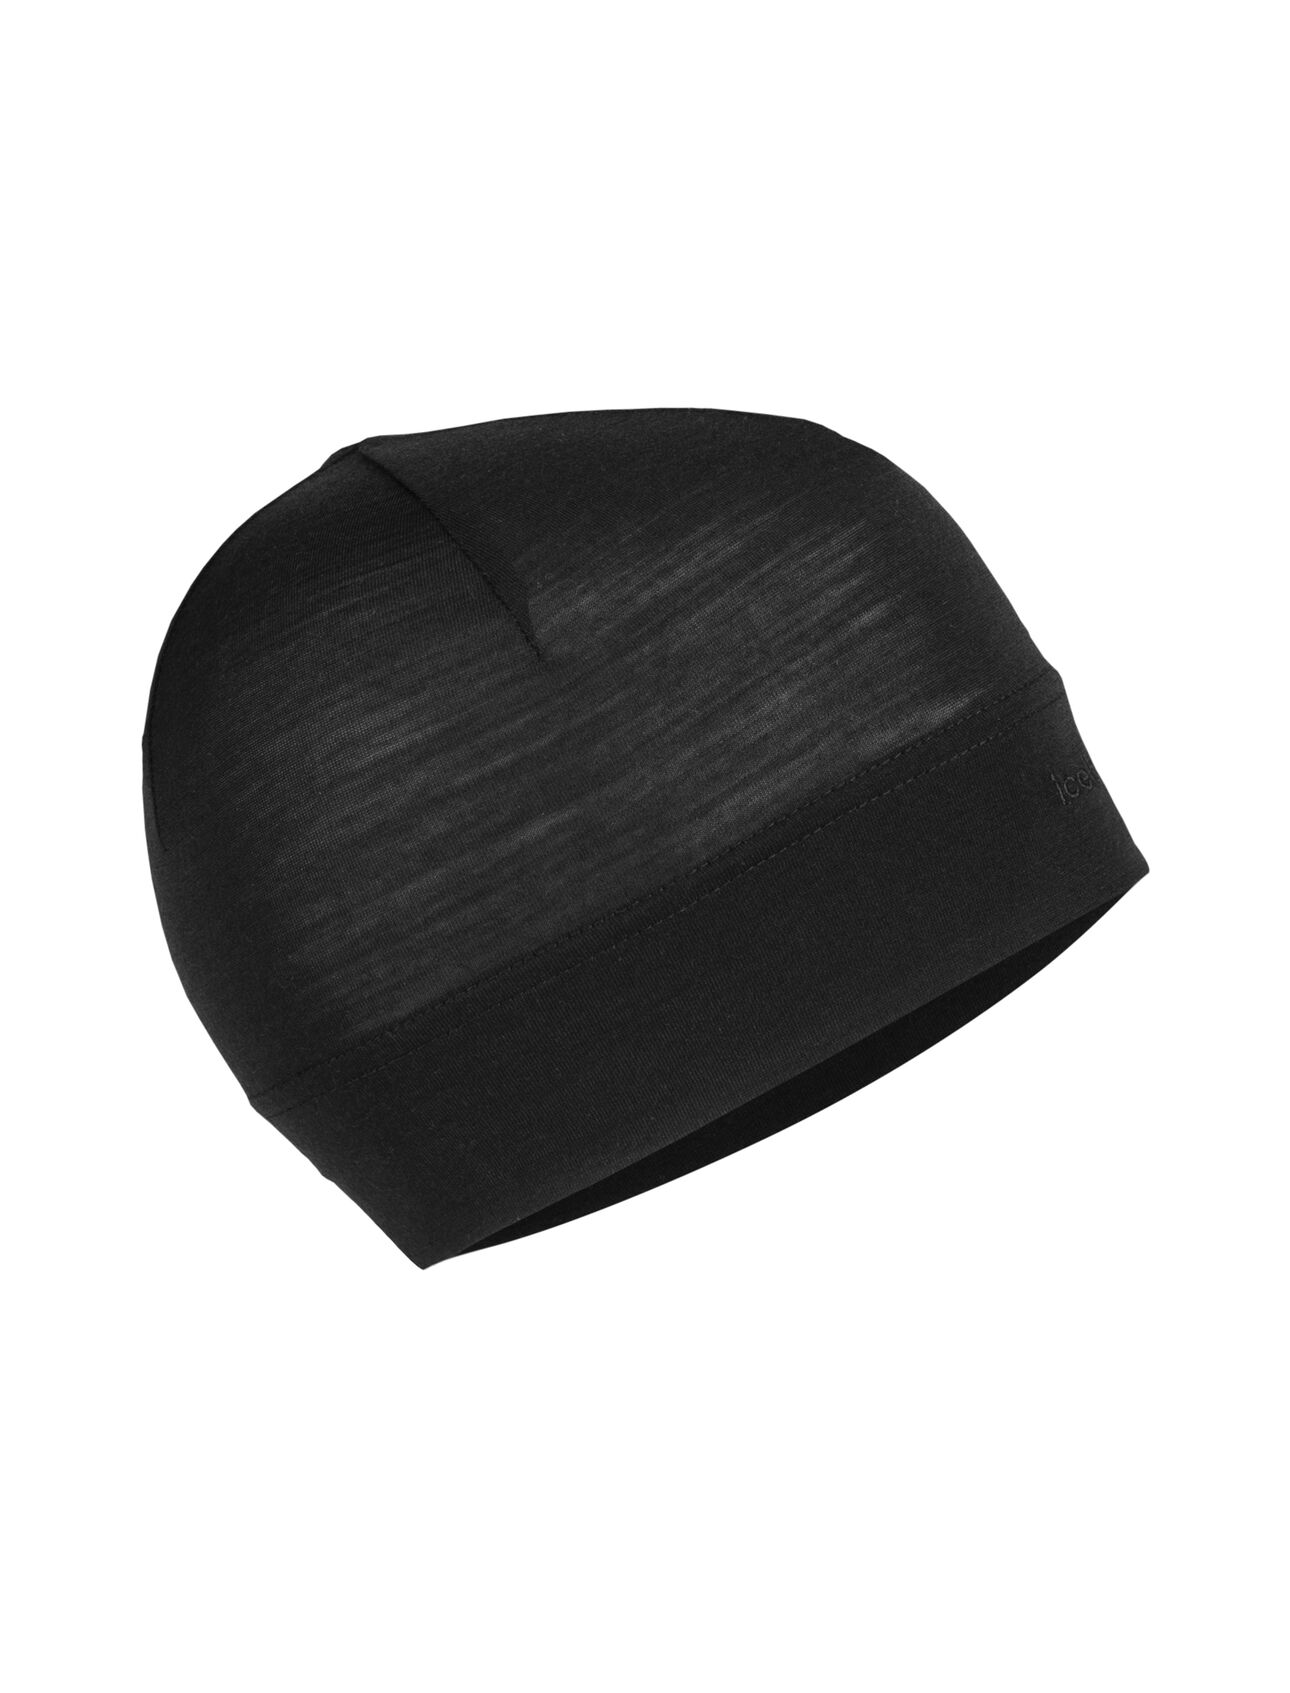 Unisex Cool-Lite™ Merino Blend Flexi Beanie Our stretchy, ultralight merino wool beanie for year-round performance, the Cool-Lite™ Flexi Beanie features soft, breathable and naturally odor resistant Cool-Lite™jersey fabric.